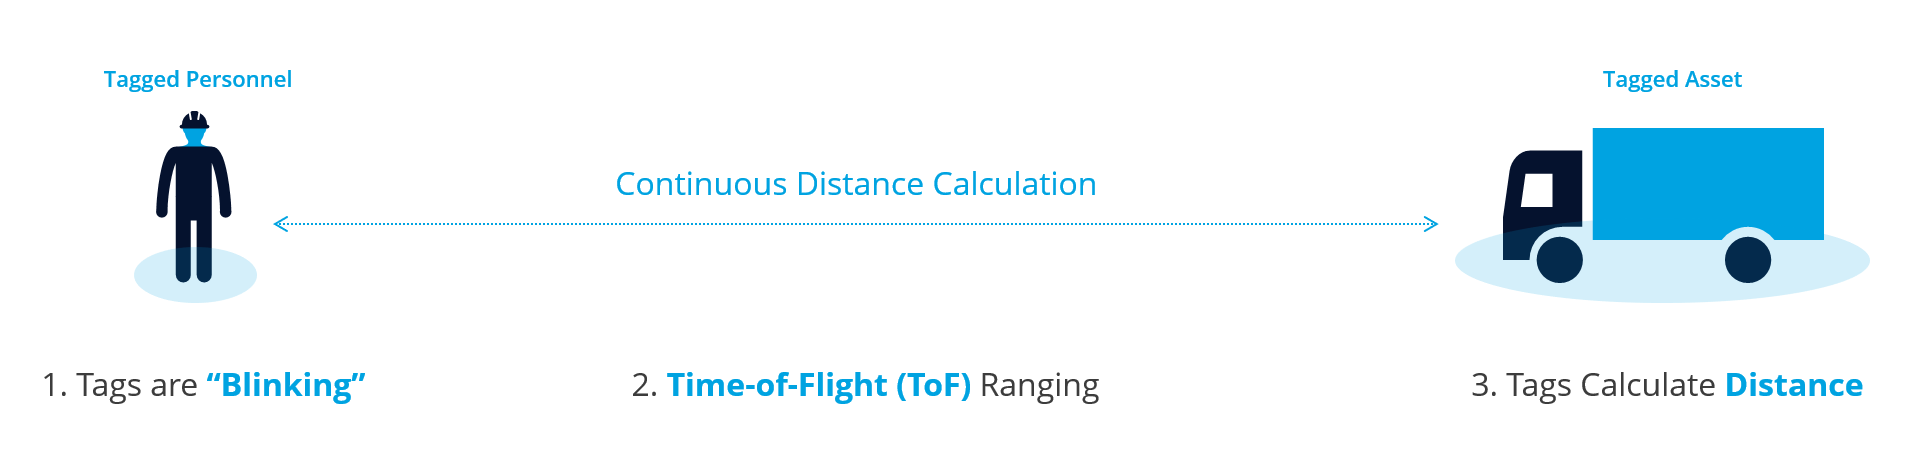 How time of flight ranging works to continuously calculate the distance between a tagged asset and a tagged employee.